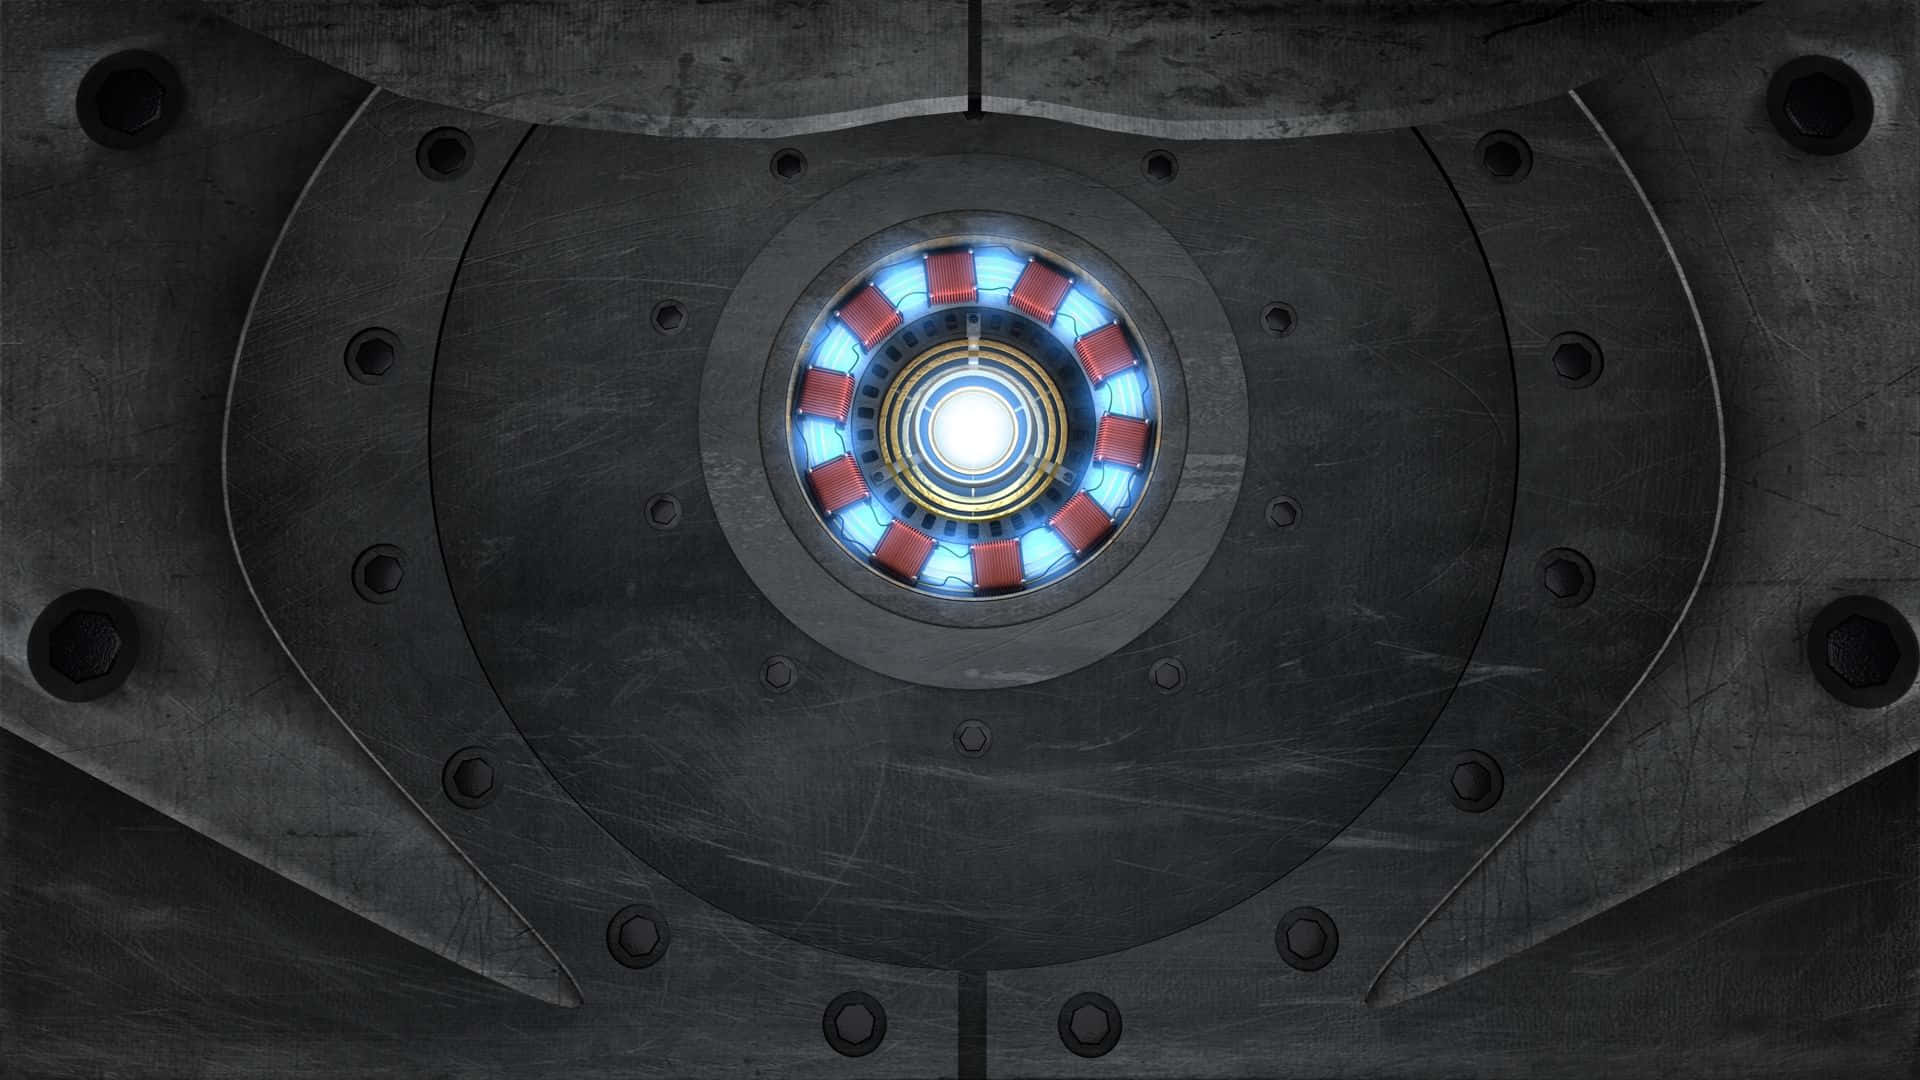 The glowing Arc Reactor from the Iron Man suit. Wallpaper